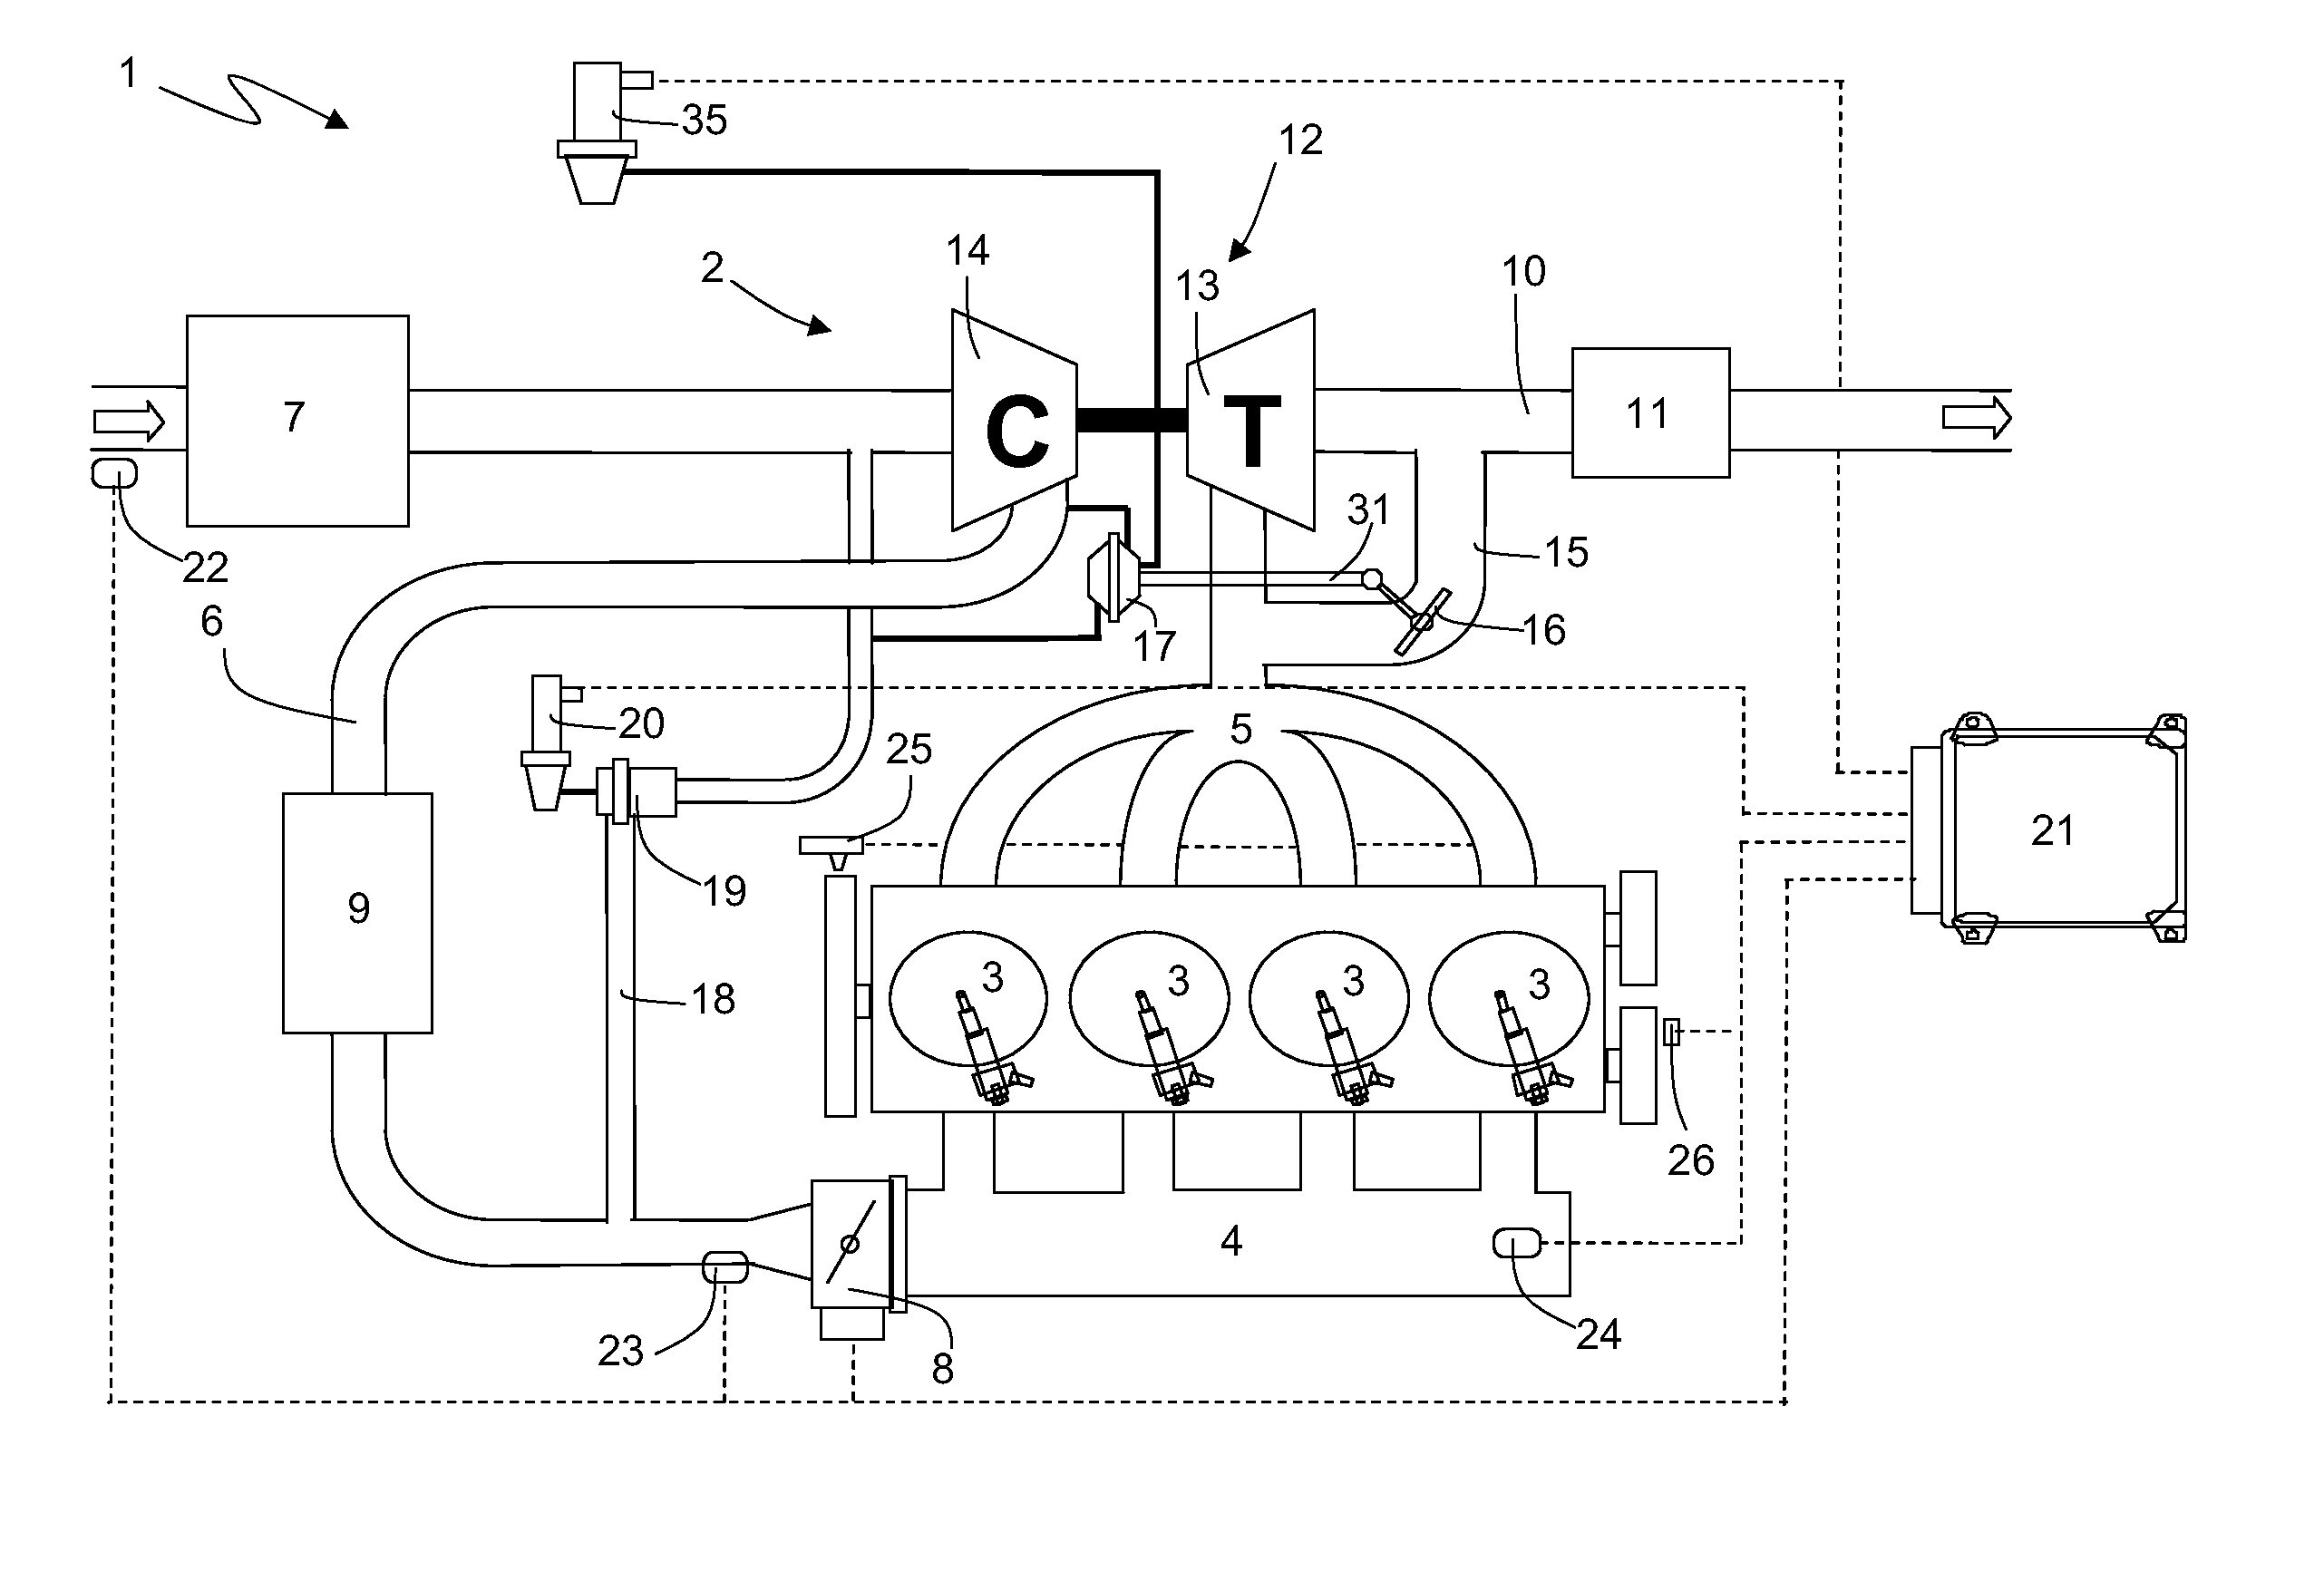 Method for controlling with adaptivity a wastegate in a turbocharged internal combustion engine